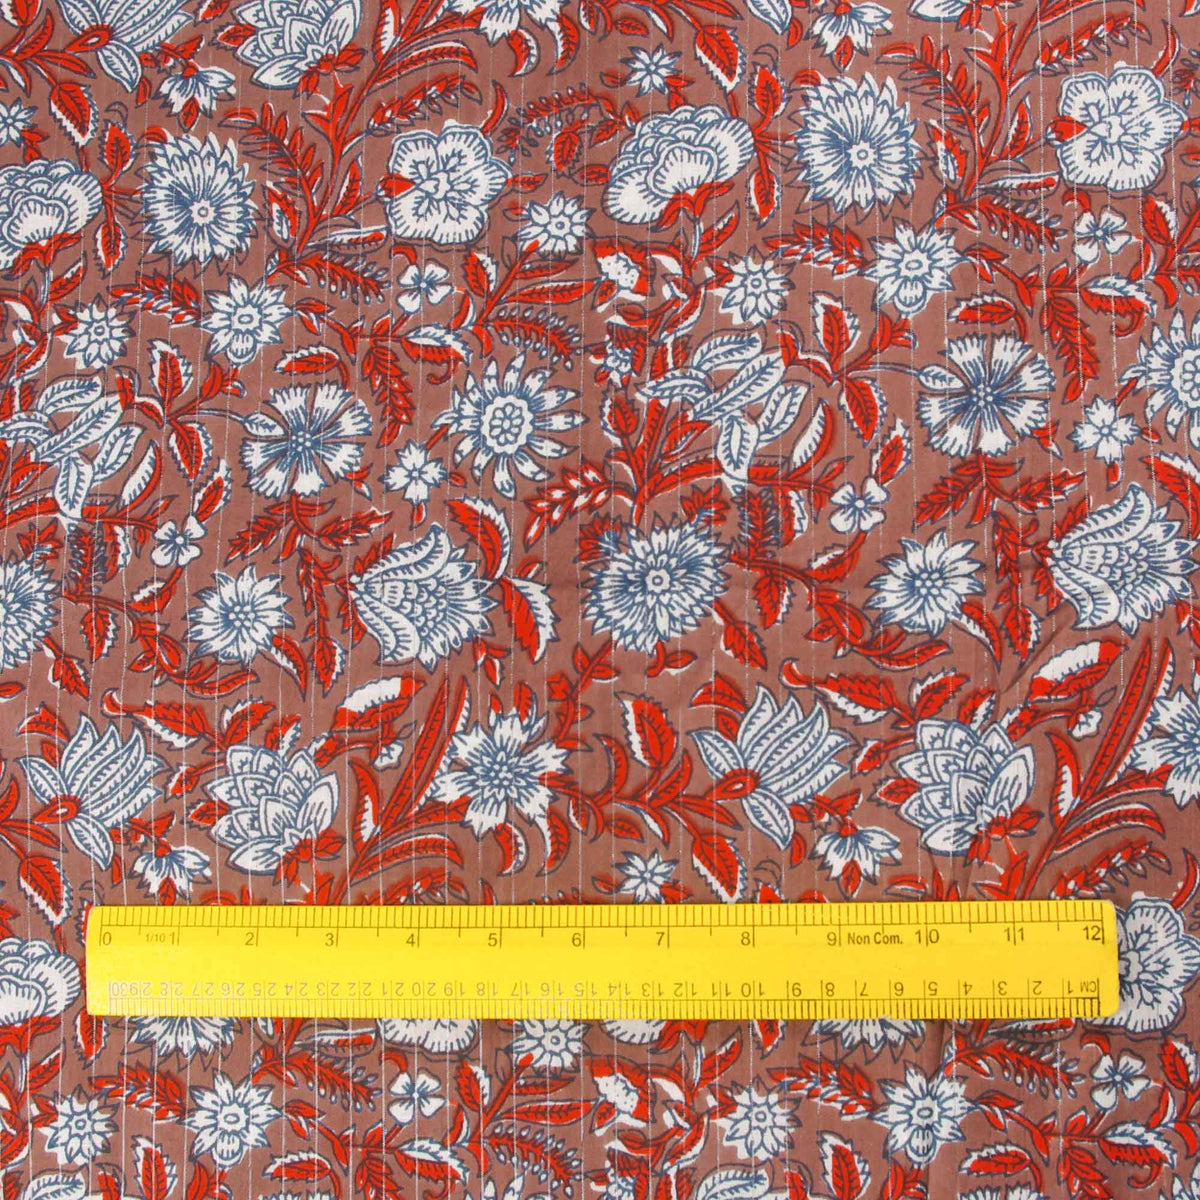 Hand Screen Printed 100% Cotton Fabric - Red Vines On Brown With Silver Lines (Design 385)